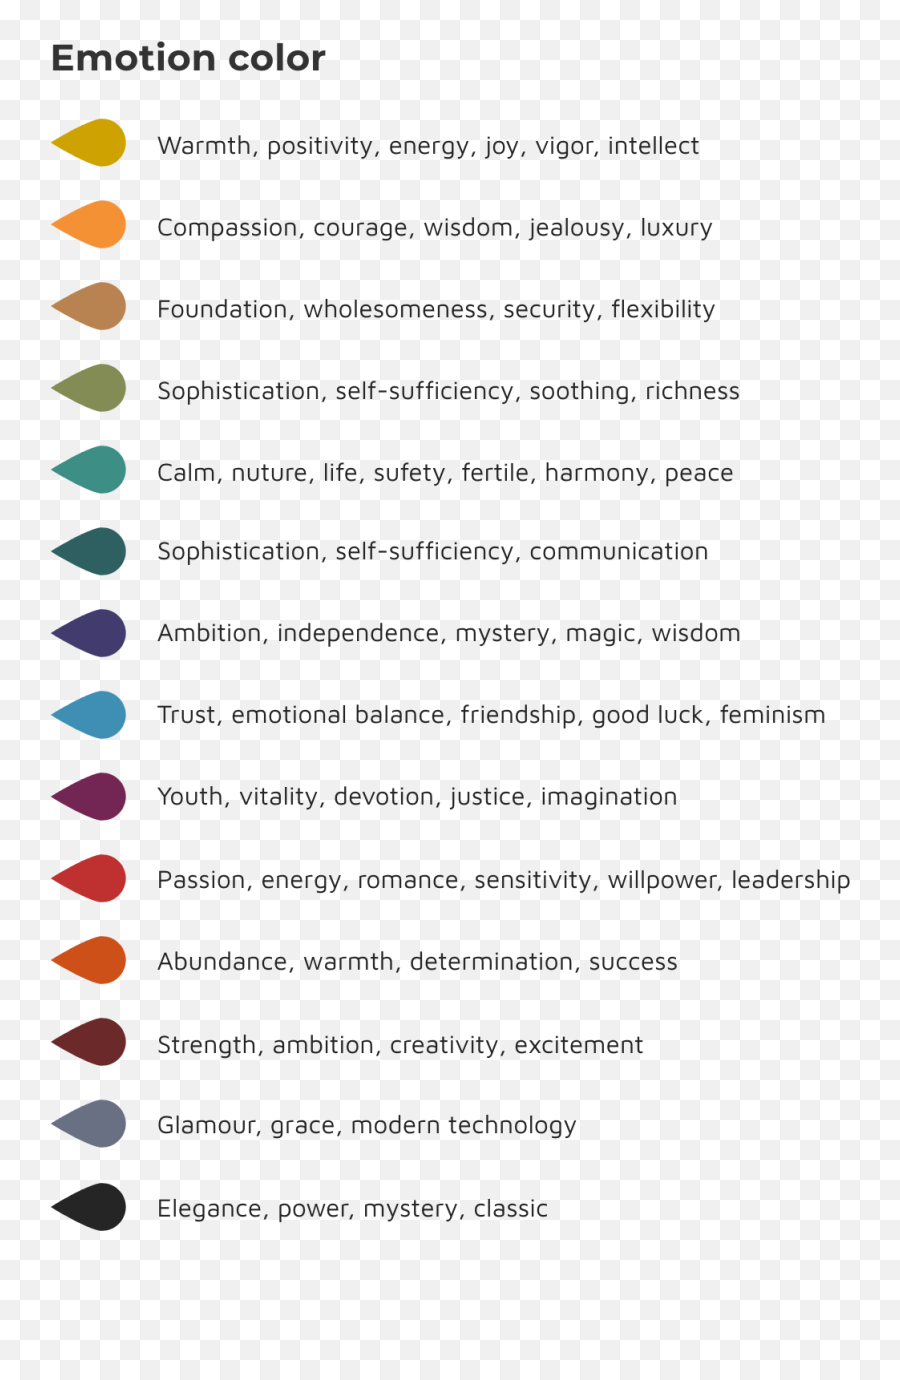 What Are The Best Resume Colors In 2021 Hereu0027s What The - Dot Emoji,Emotion Colors